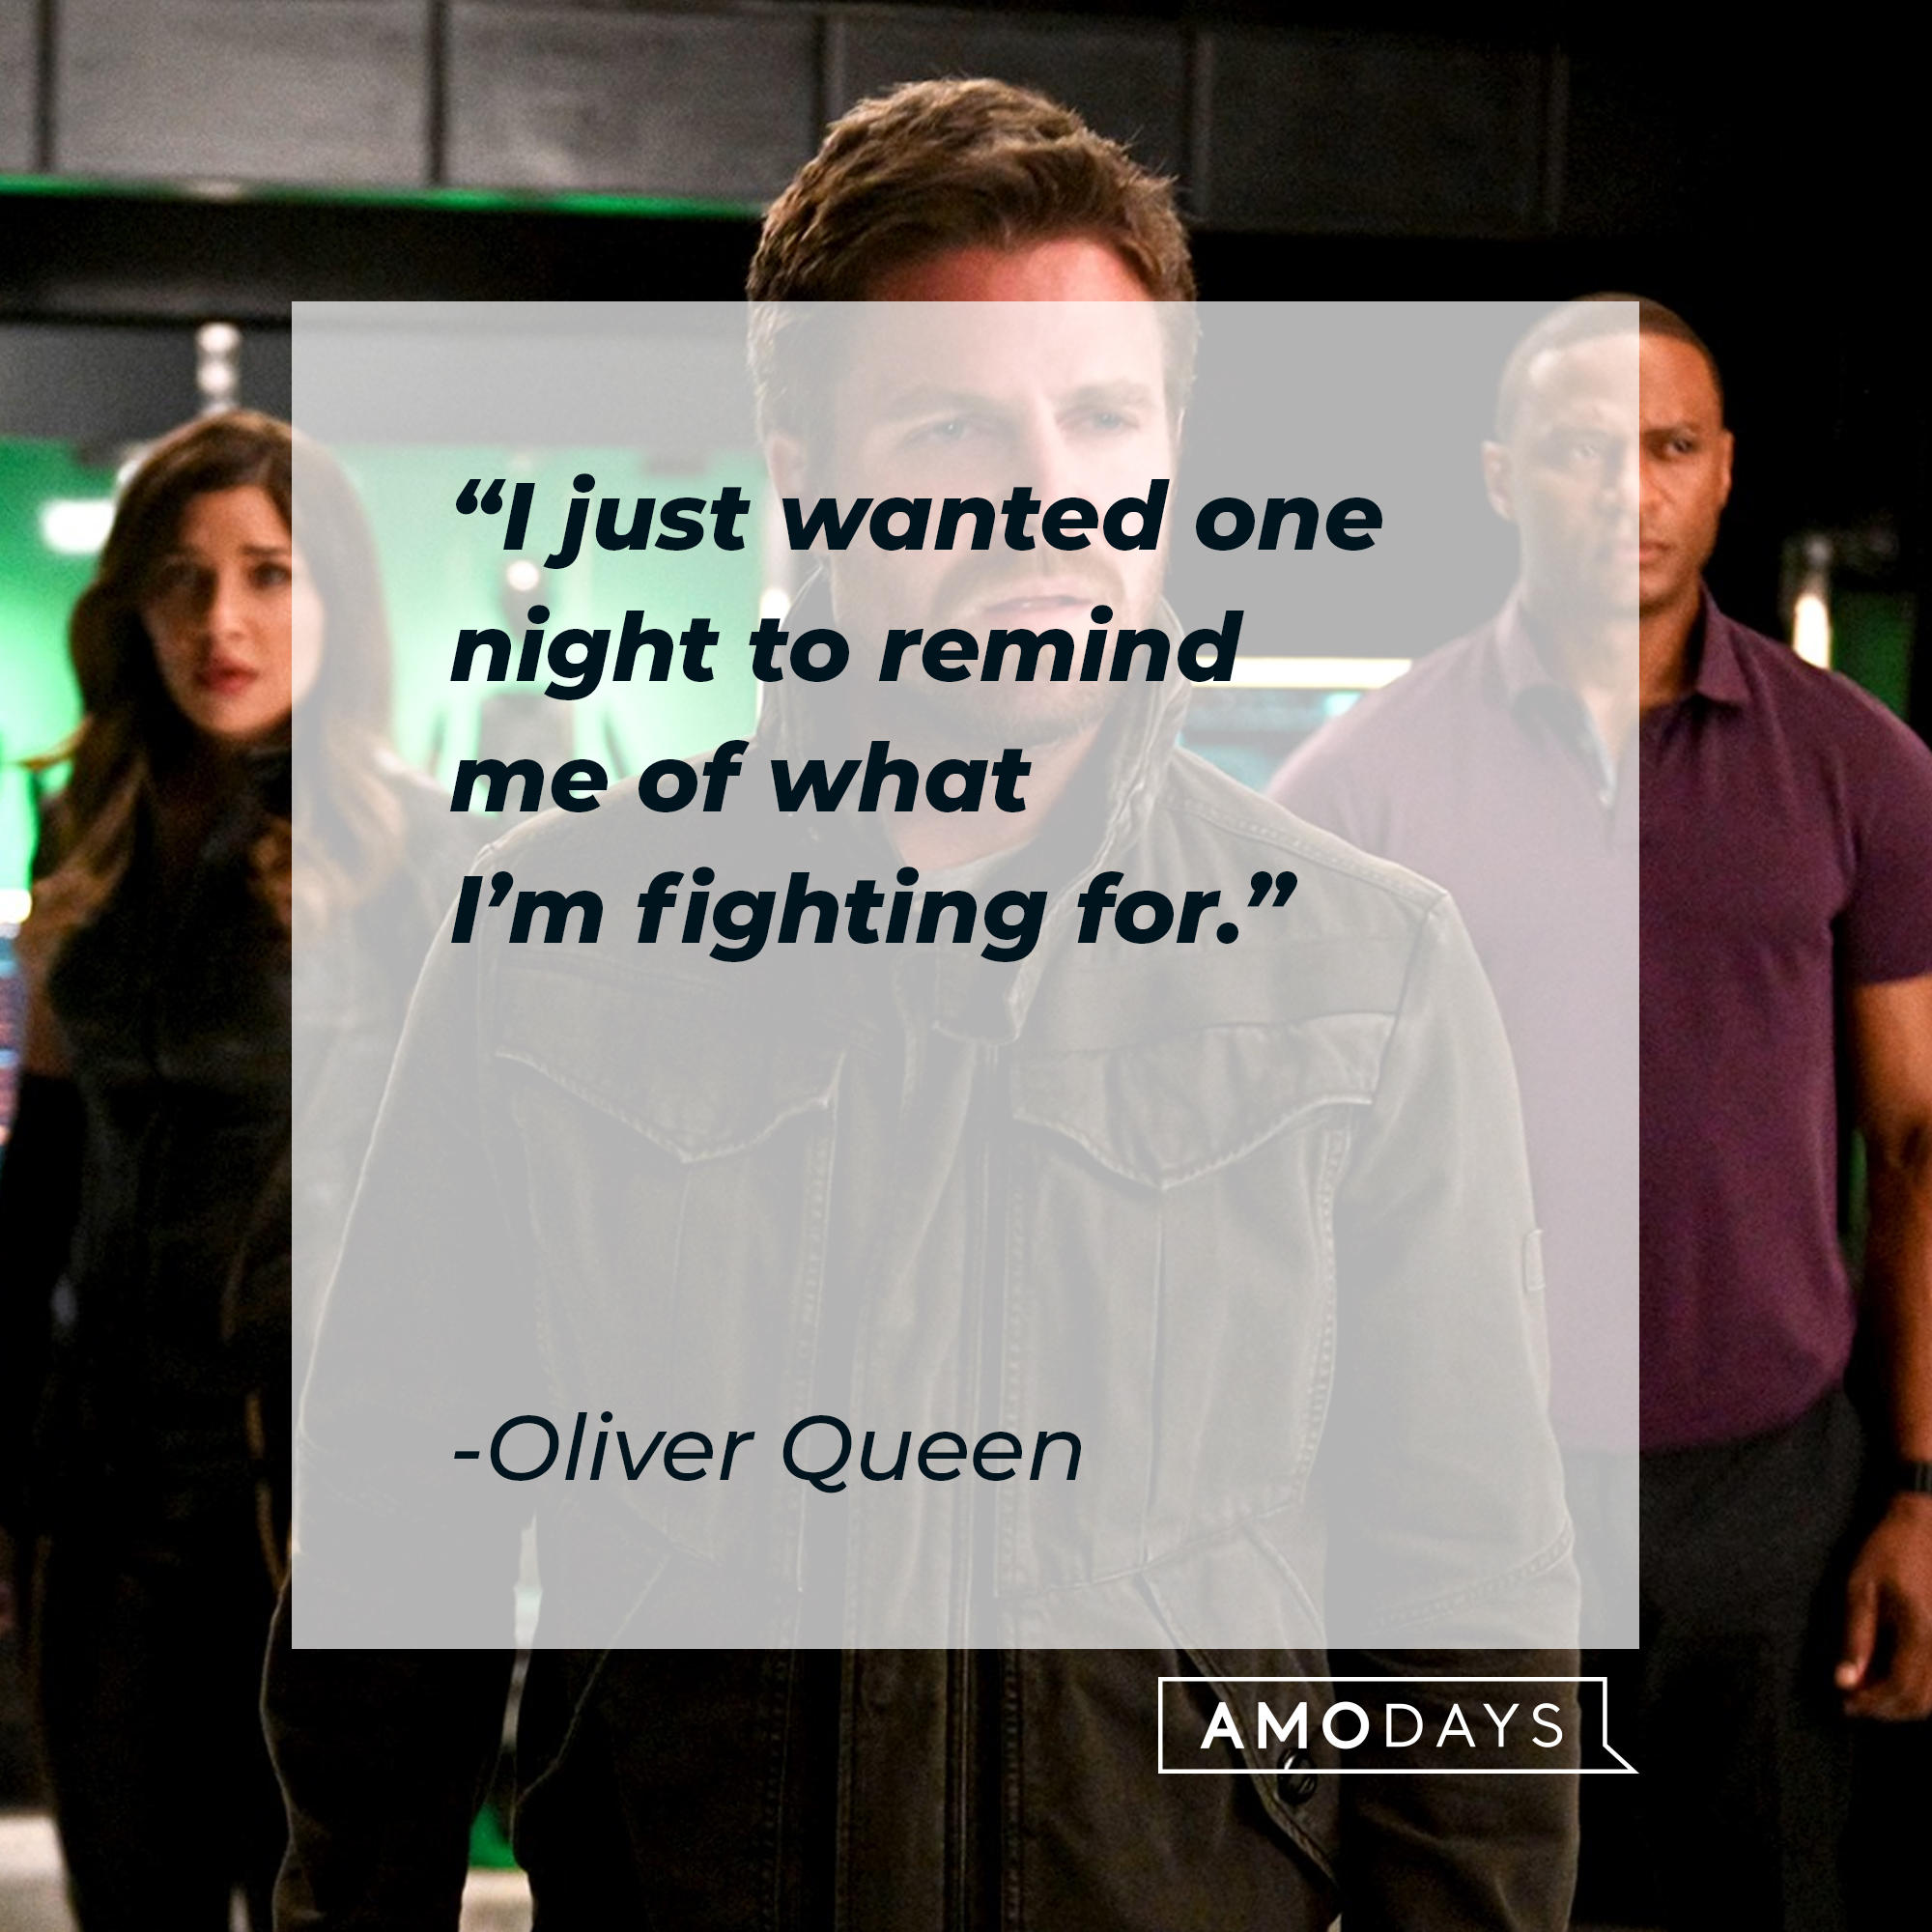 An image of Oliver Queen and other characters with his quote: “I just wanted one night to remind me of what I’m fighting for.” | Source: facebook.com/CWArrow